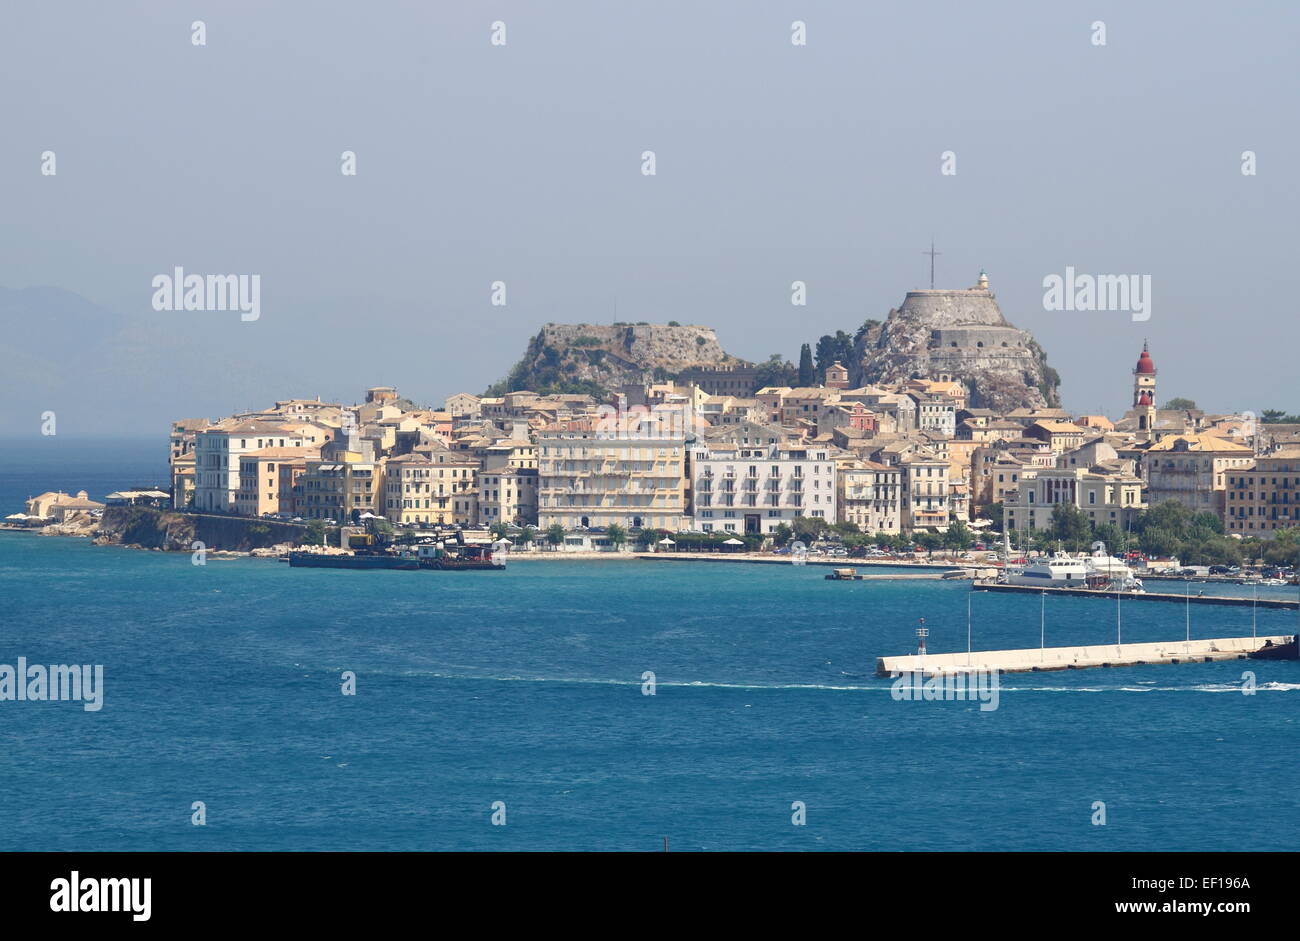 Landscape view of the town of Kerkira in Corfu Island, Greece Stock Photo